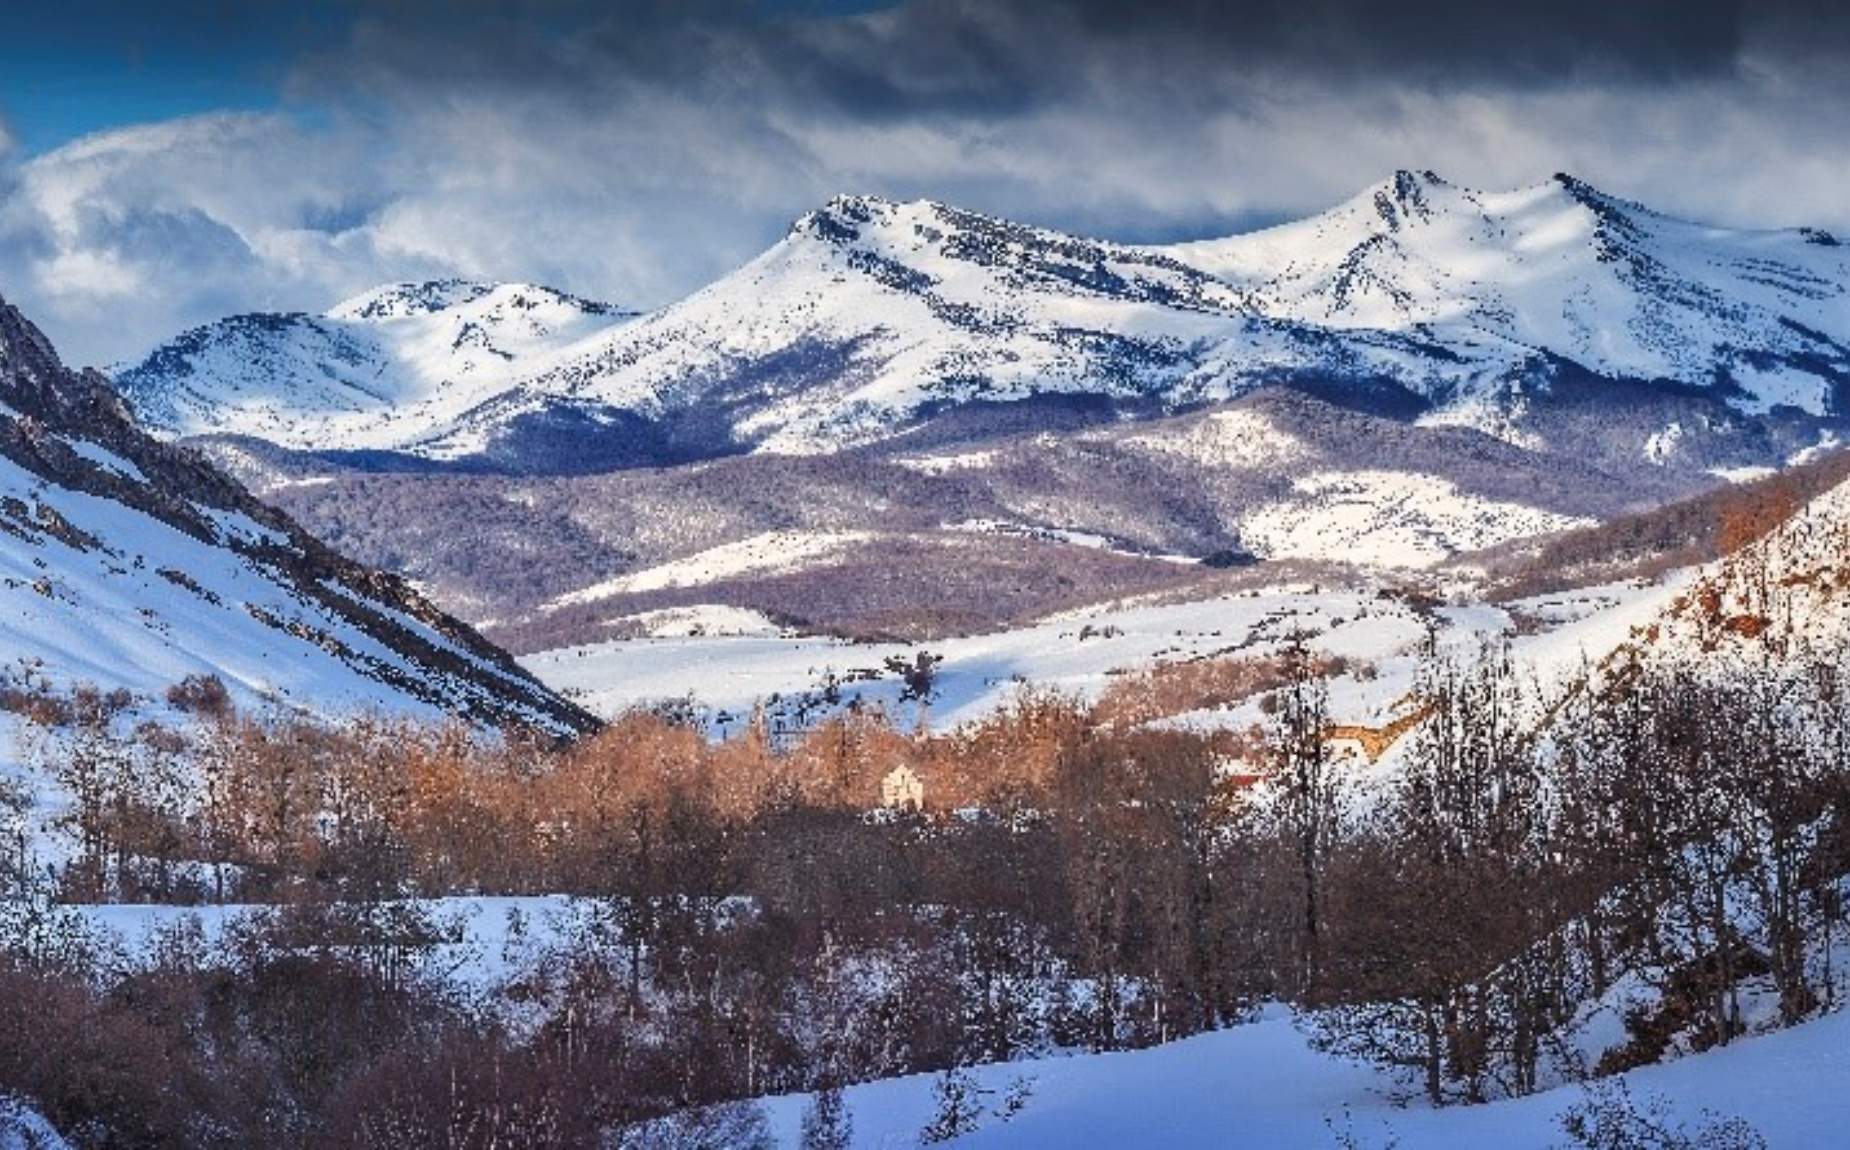 Image of a snowy mountain landscape